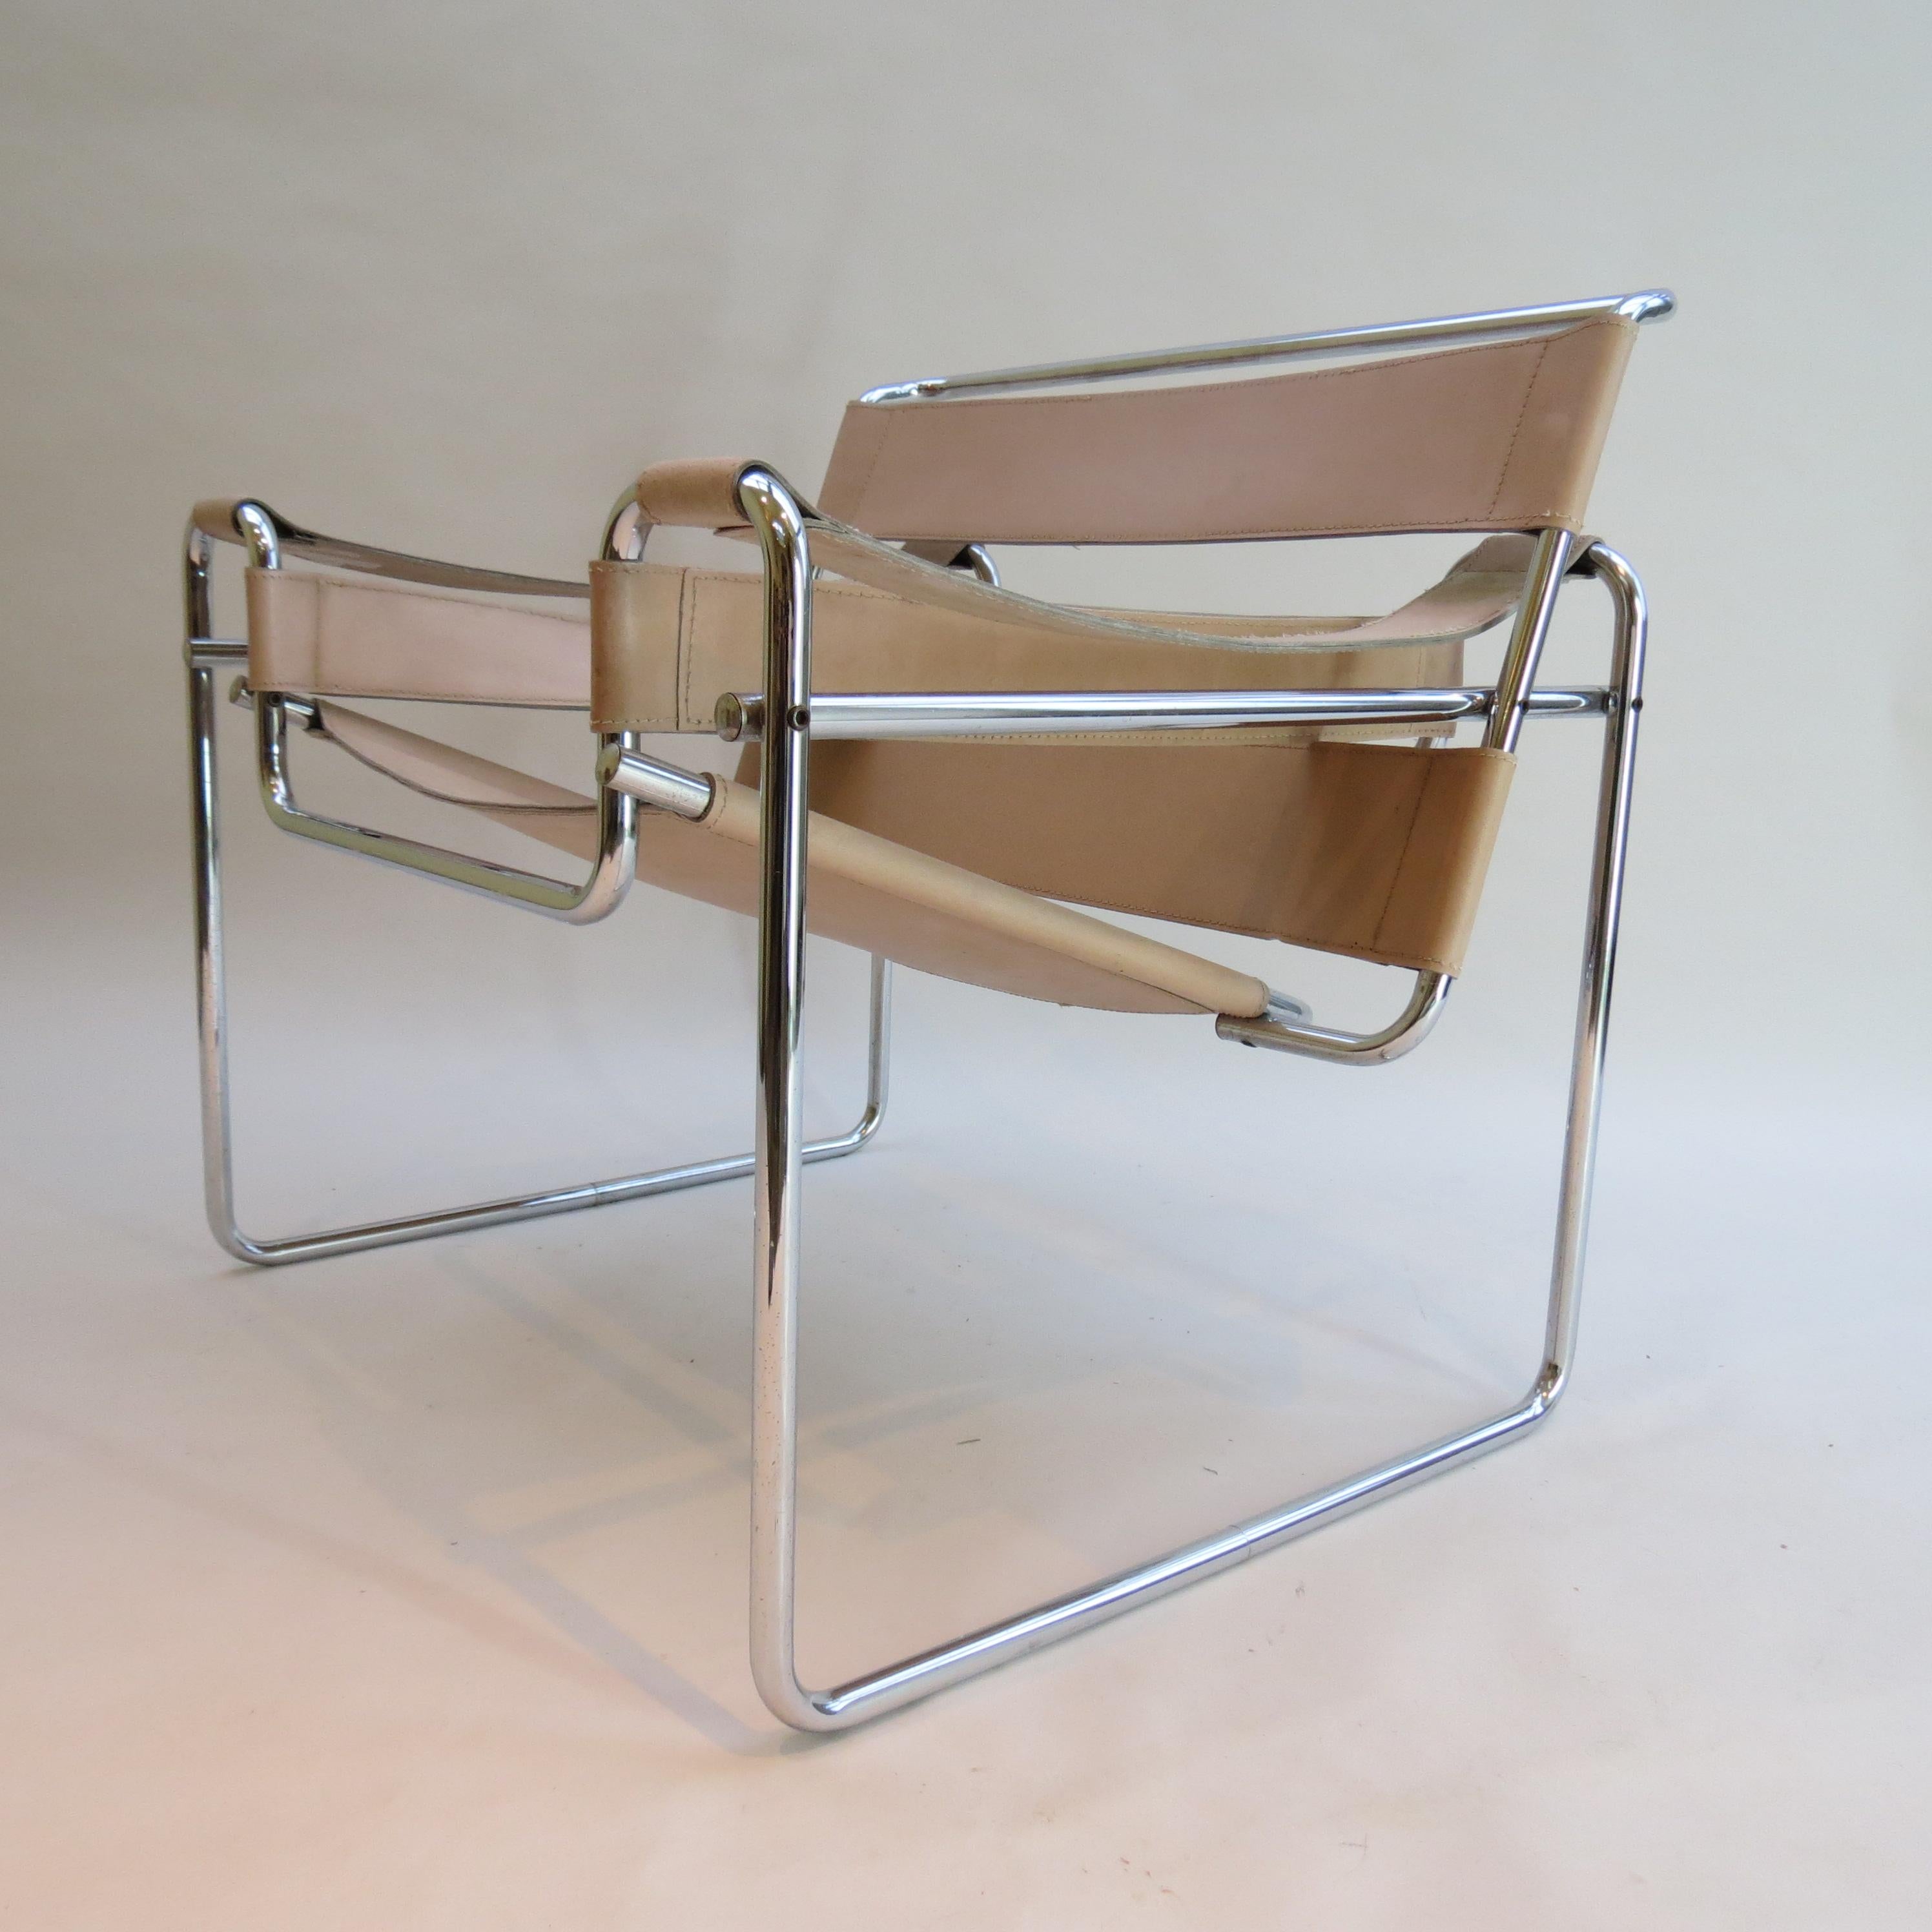 A Wassily chair designed by Marcel Breuer and manufactured by Gavina, Italy. This chair dates from 1968–1972, original year of design 1925.
Polished chrome tube with cream leather seat and arms. In good overall condition, some wear to the leather